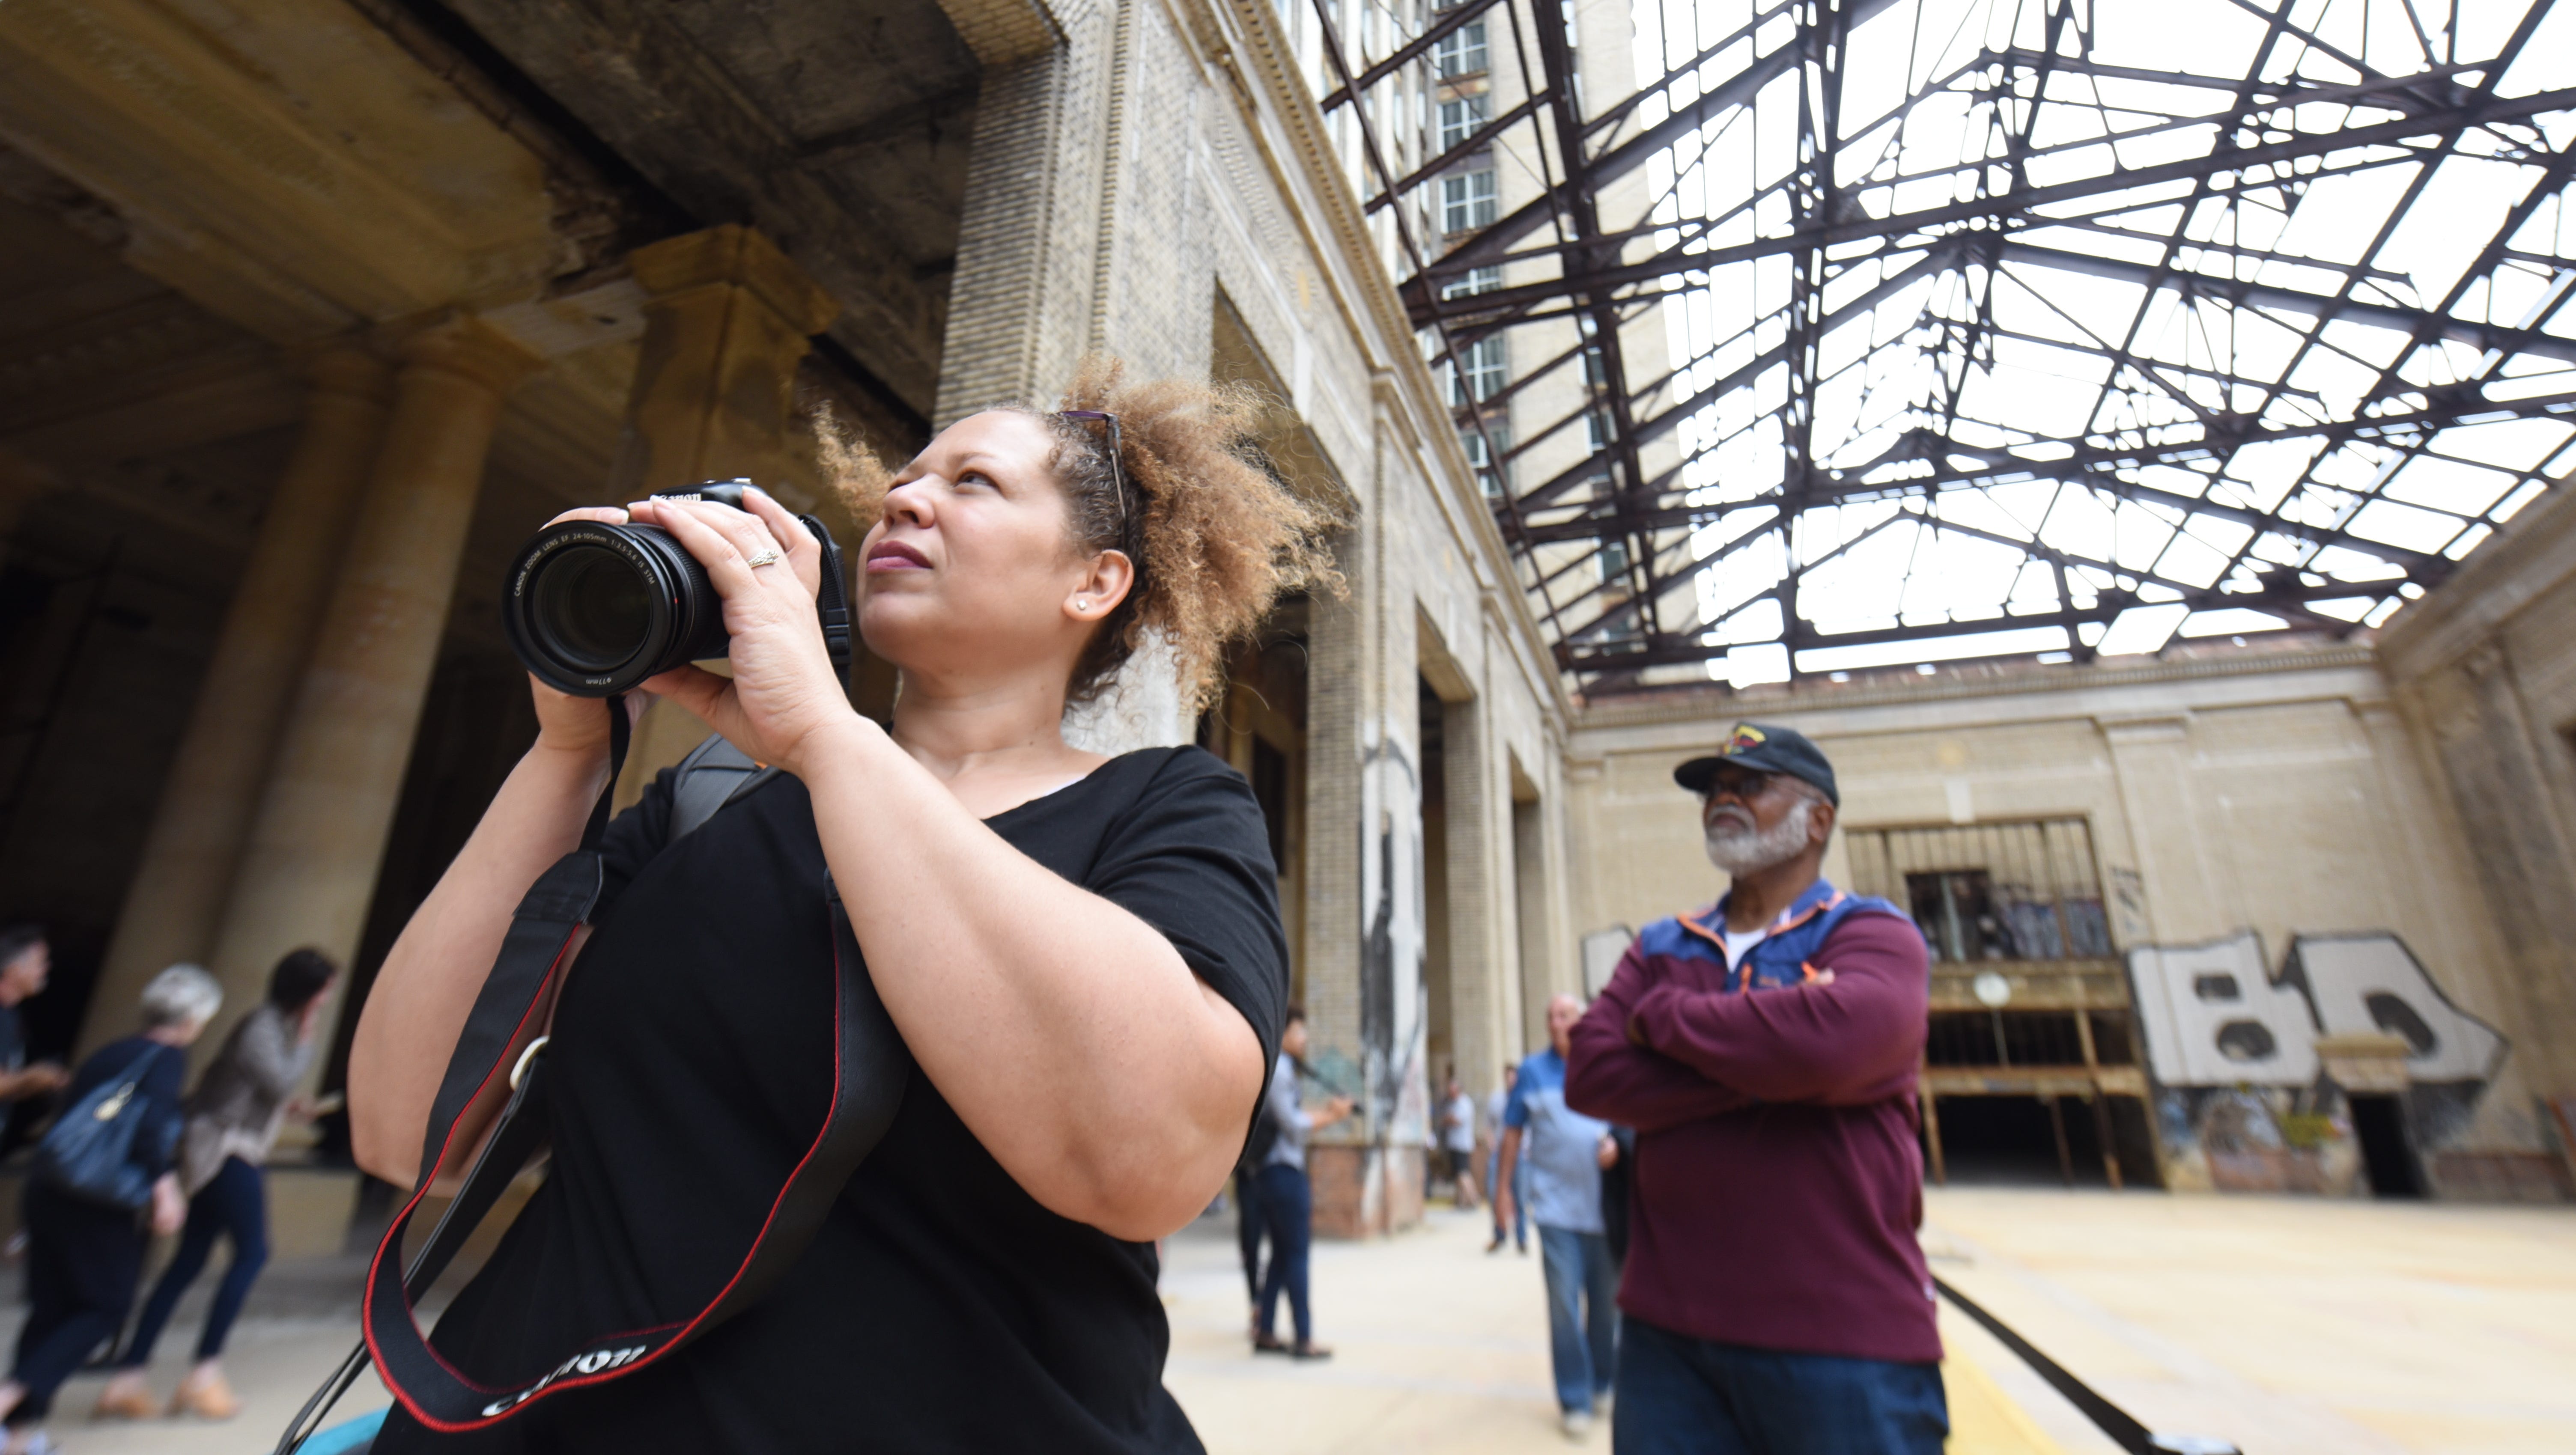 Tara Carter takes photos of the concourse area of the Michigan Central Train depot along with her father, Gary Miller of Rochester, during a public tour on Friday.